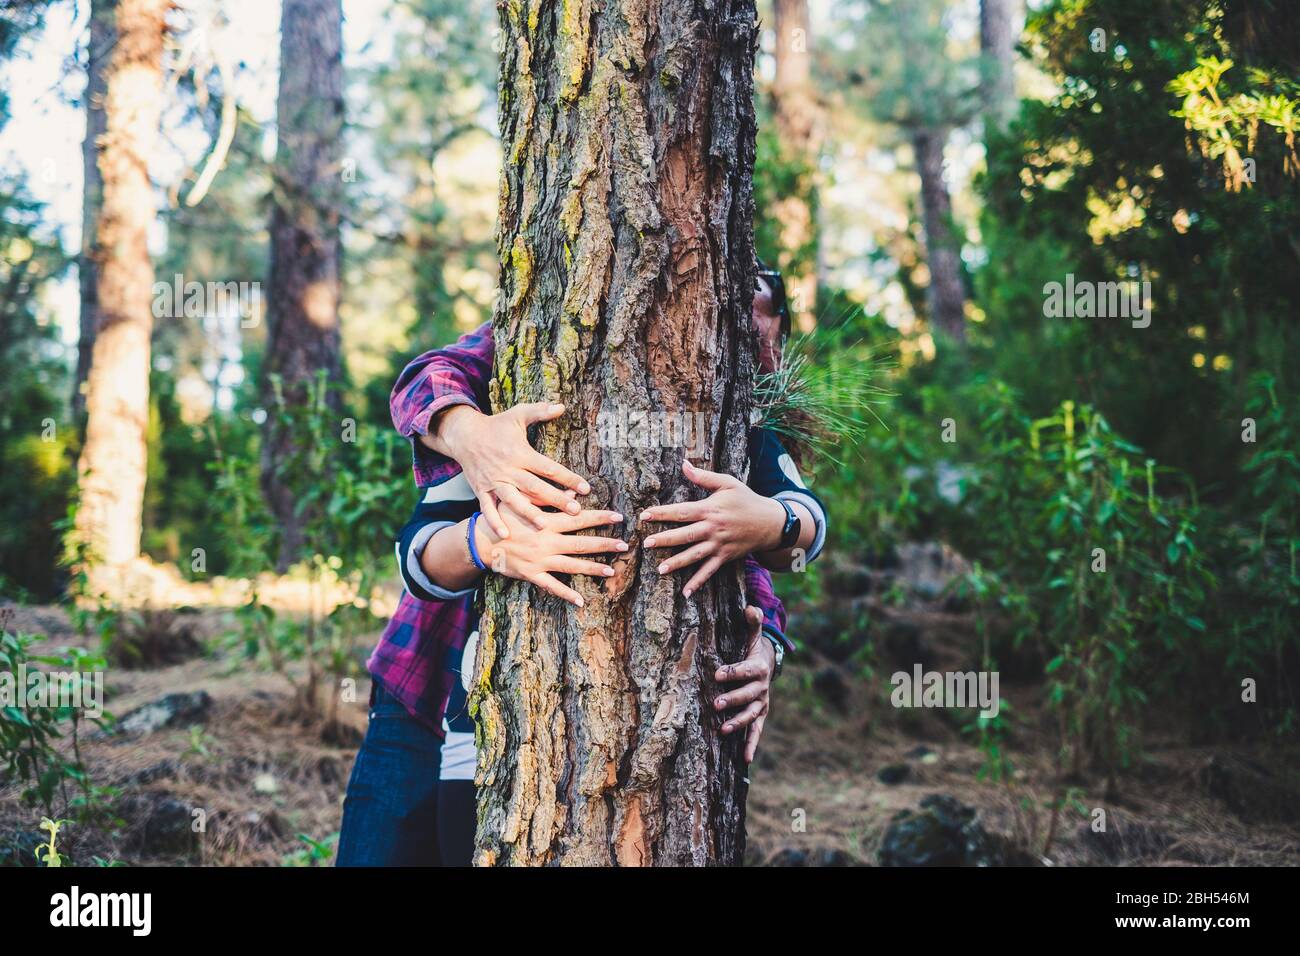 Couple embracing tree in forest Stock Photo